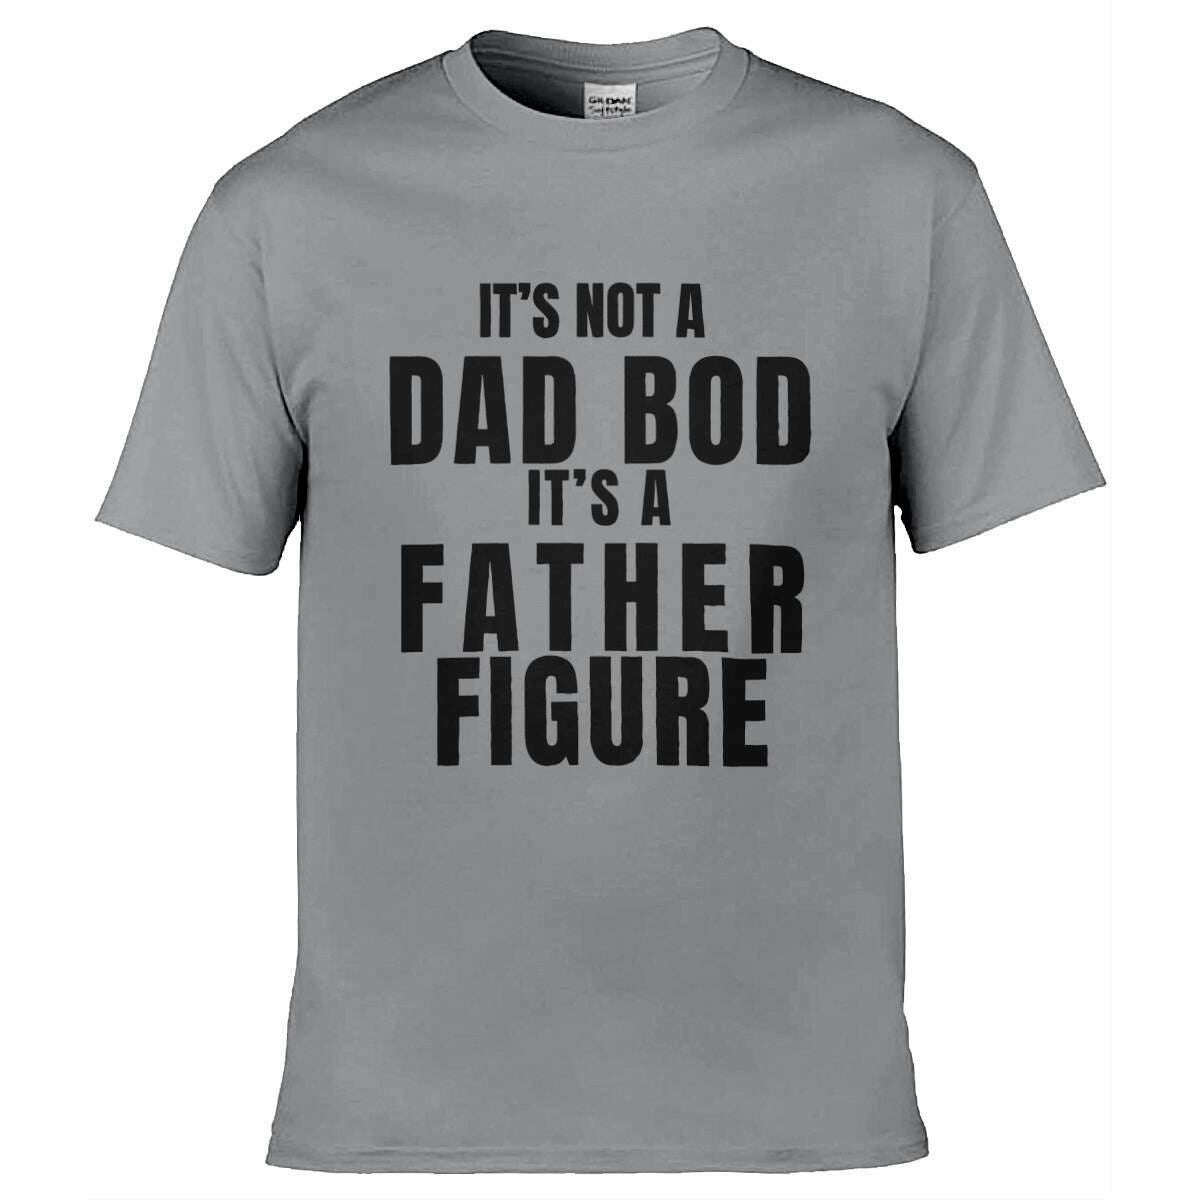 Teemarkable! It’s Not A Dad Bod It’s A Father Figure T-Shirt